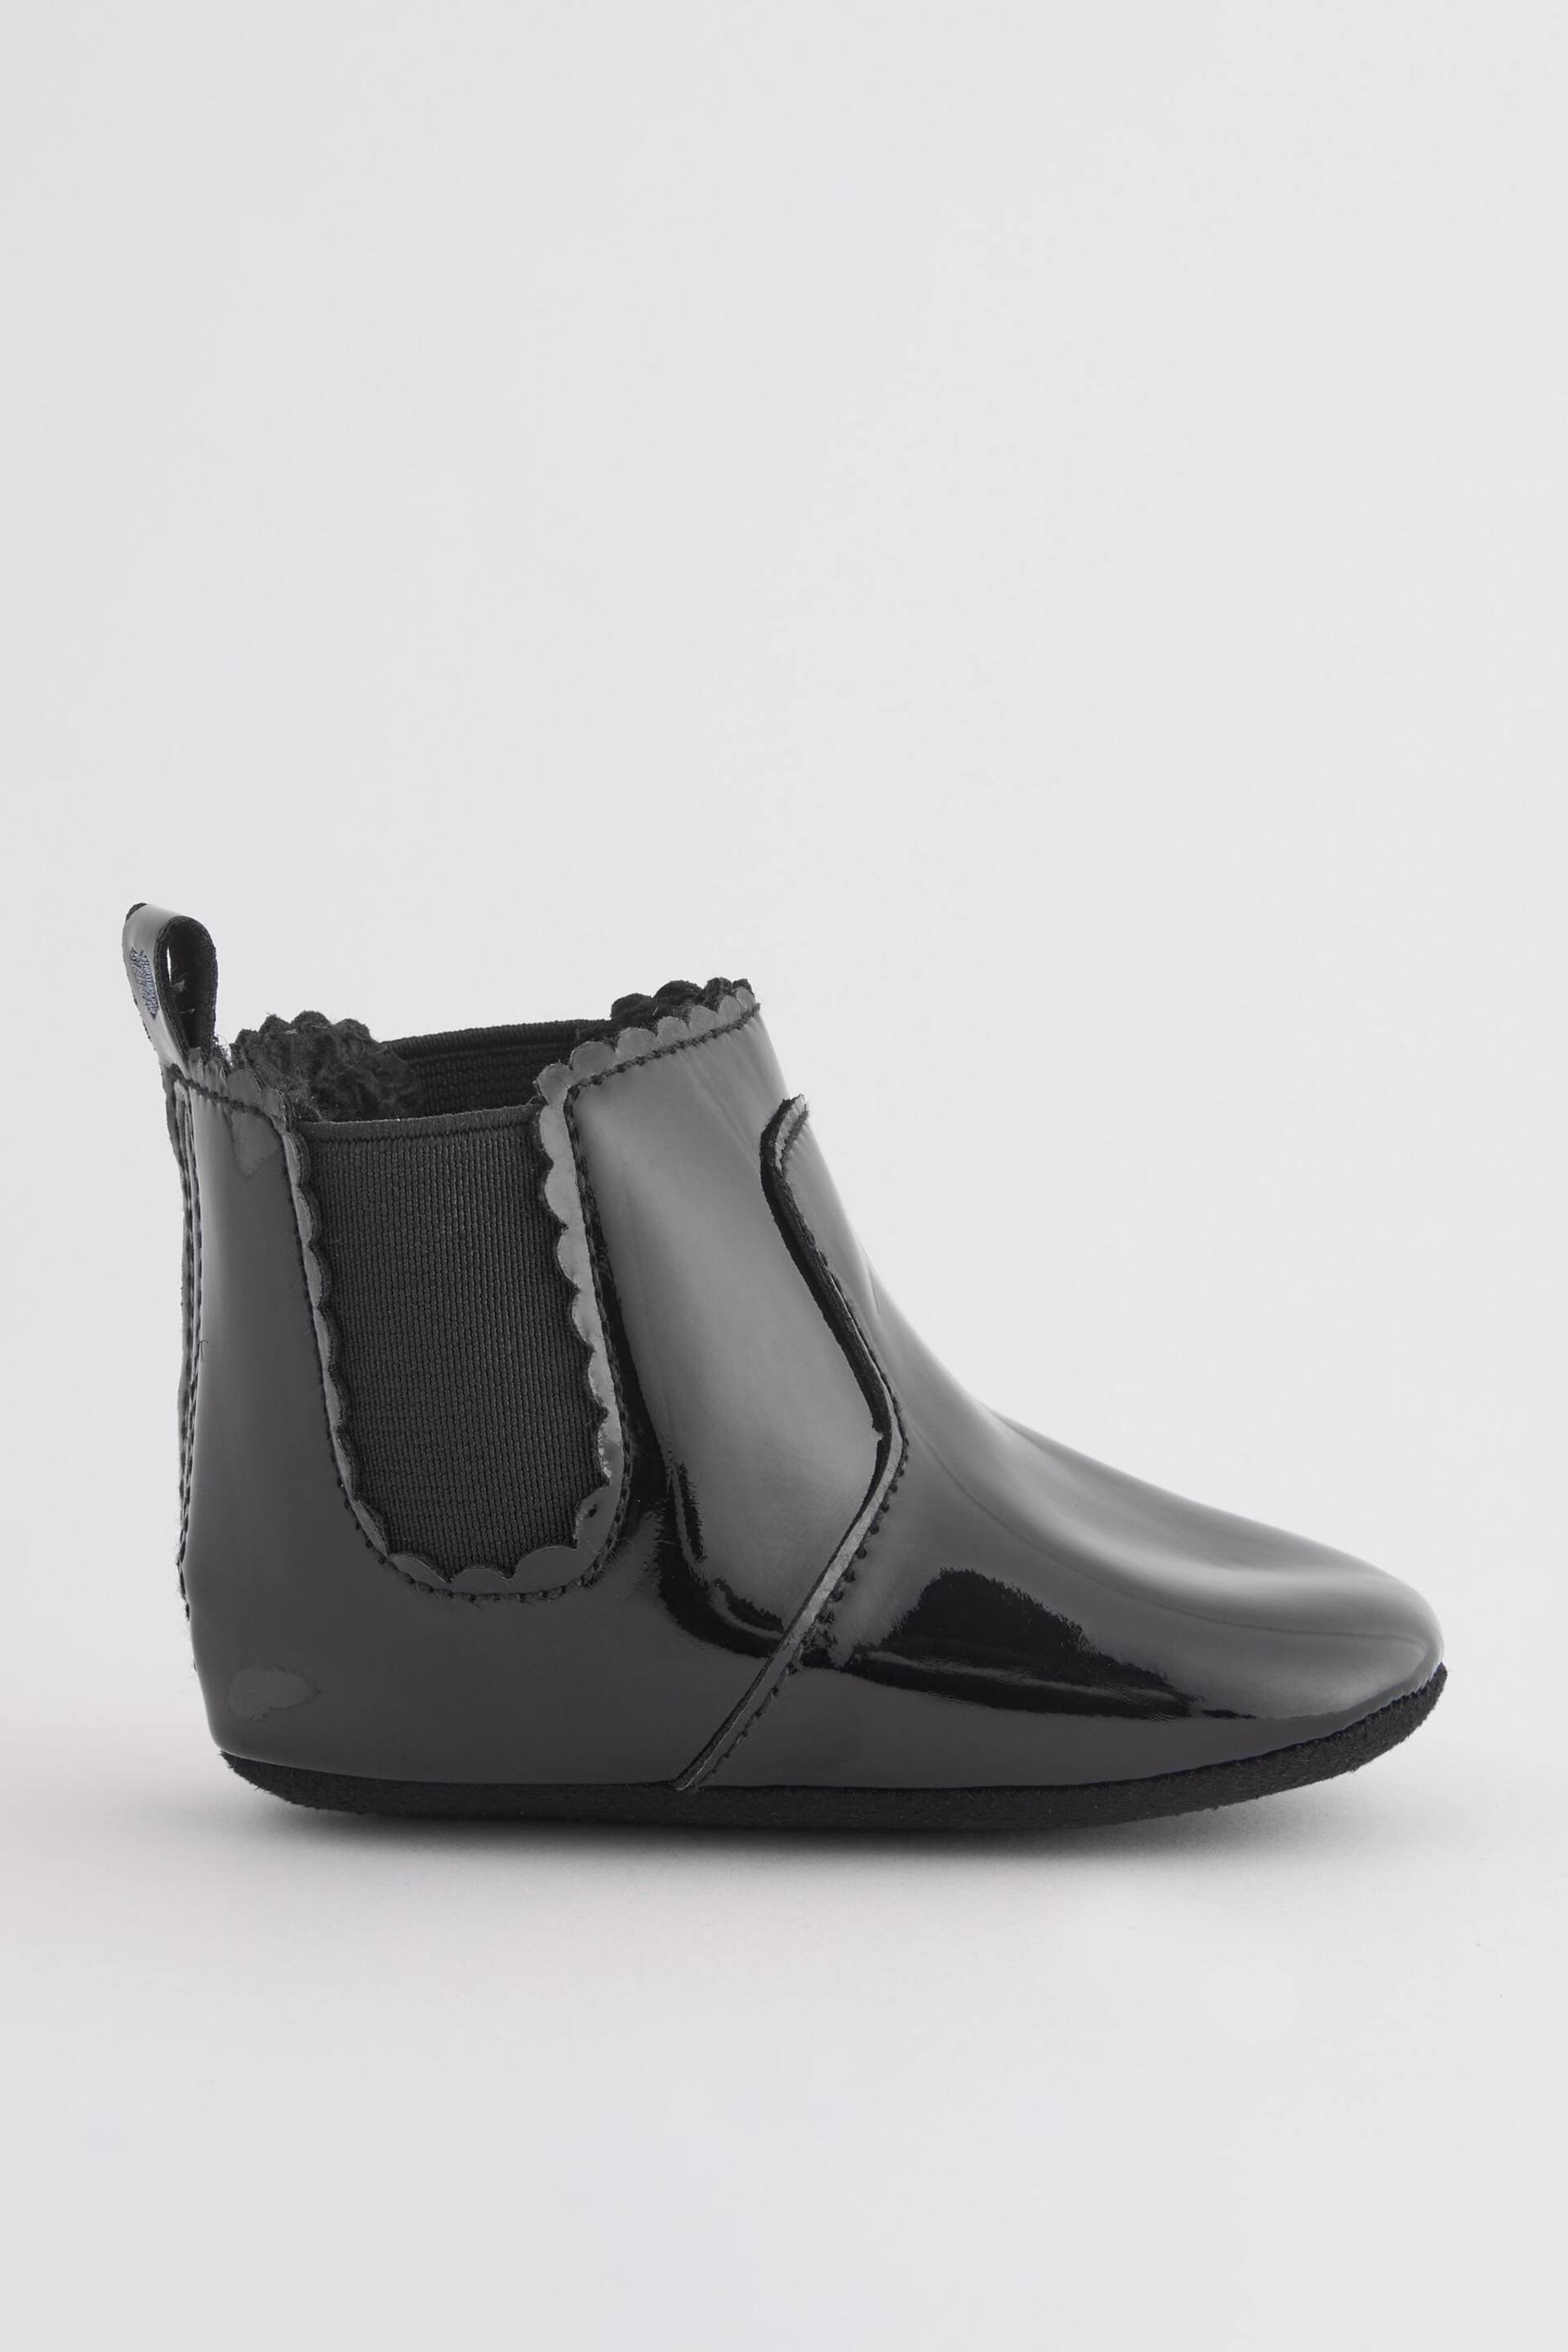 Black Patent Chelsea Baby Boots (0-24mths) - Image 2 of 7